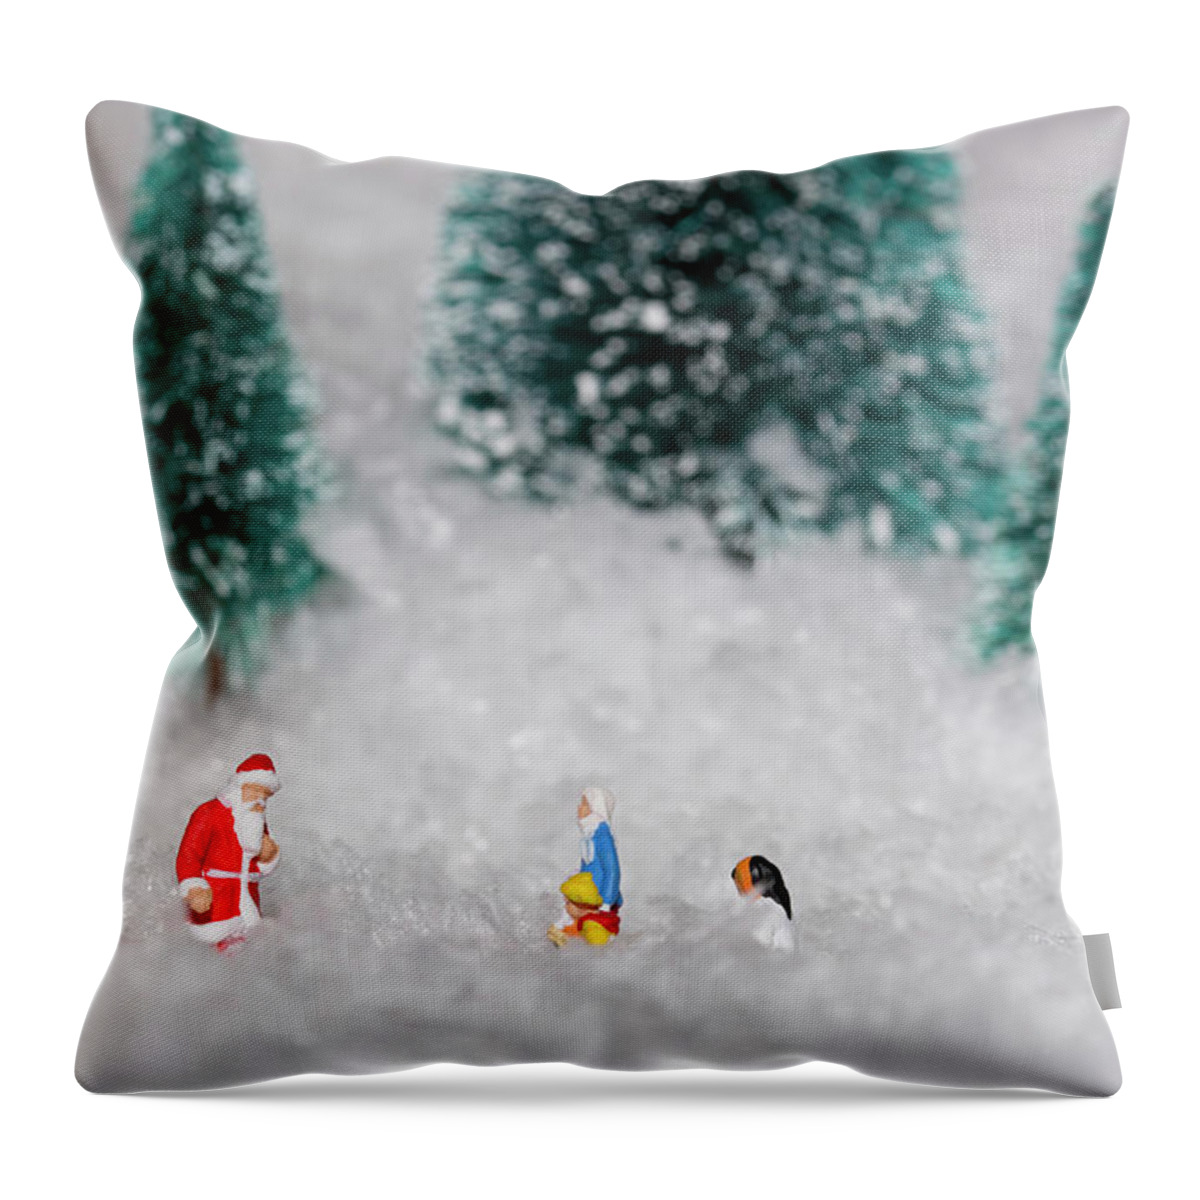 Santa Claus Throw Pillow featuring the photograph Santas Special Visit 1 by Steve Purnell